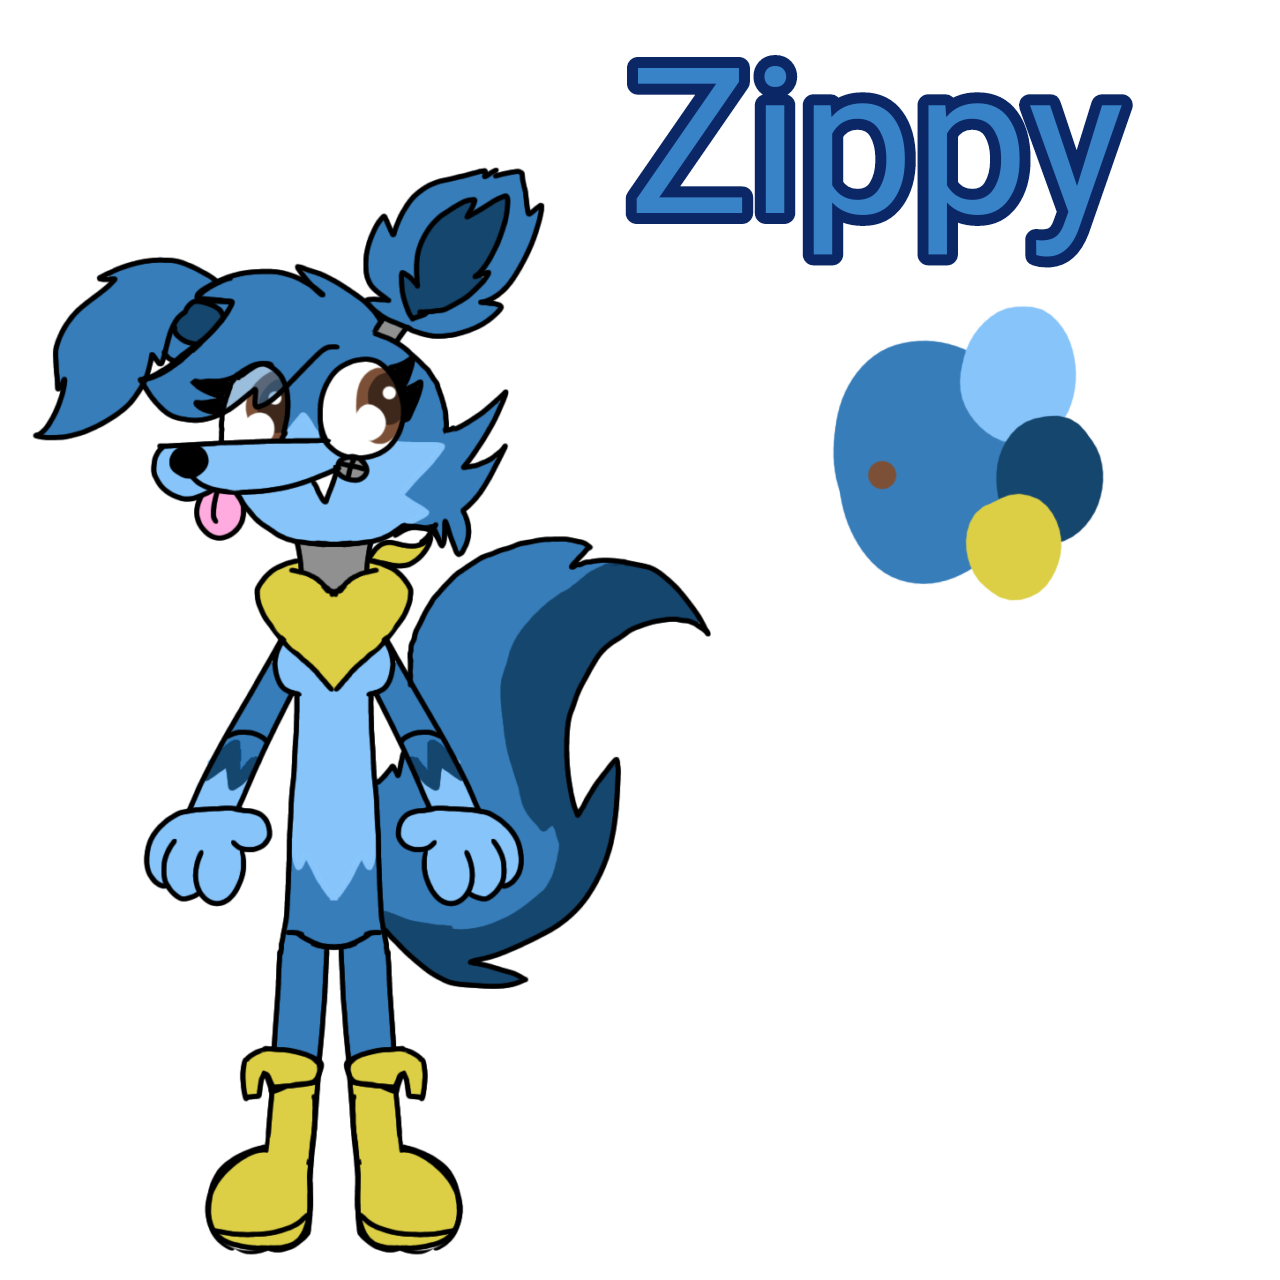 FNAF OC Adoptable - Zippy The Zebra (CLOSED) by MochiFries on